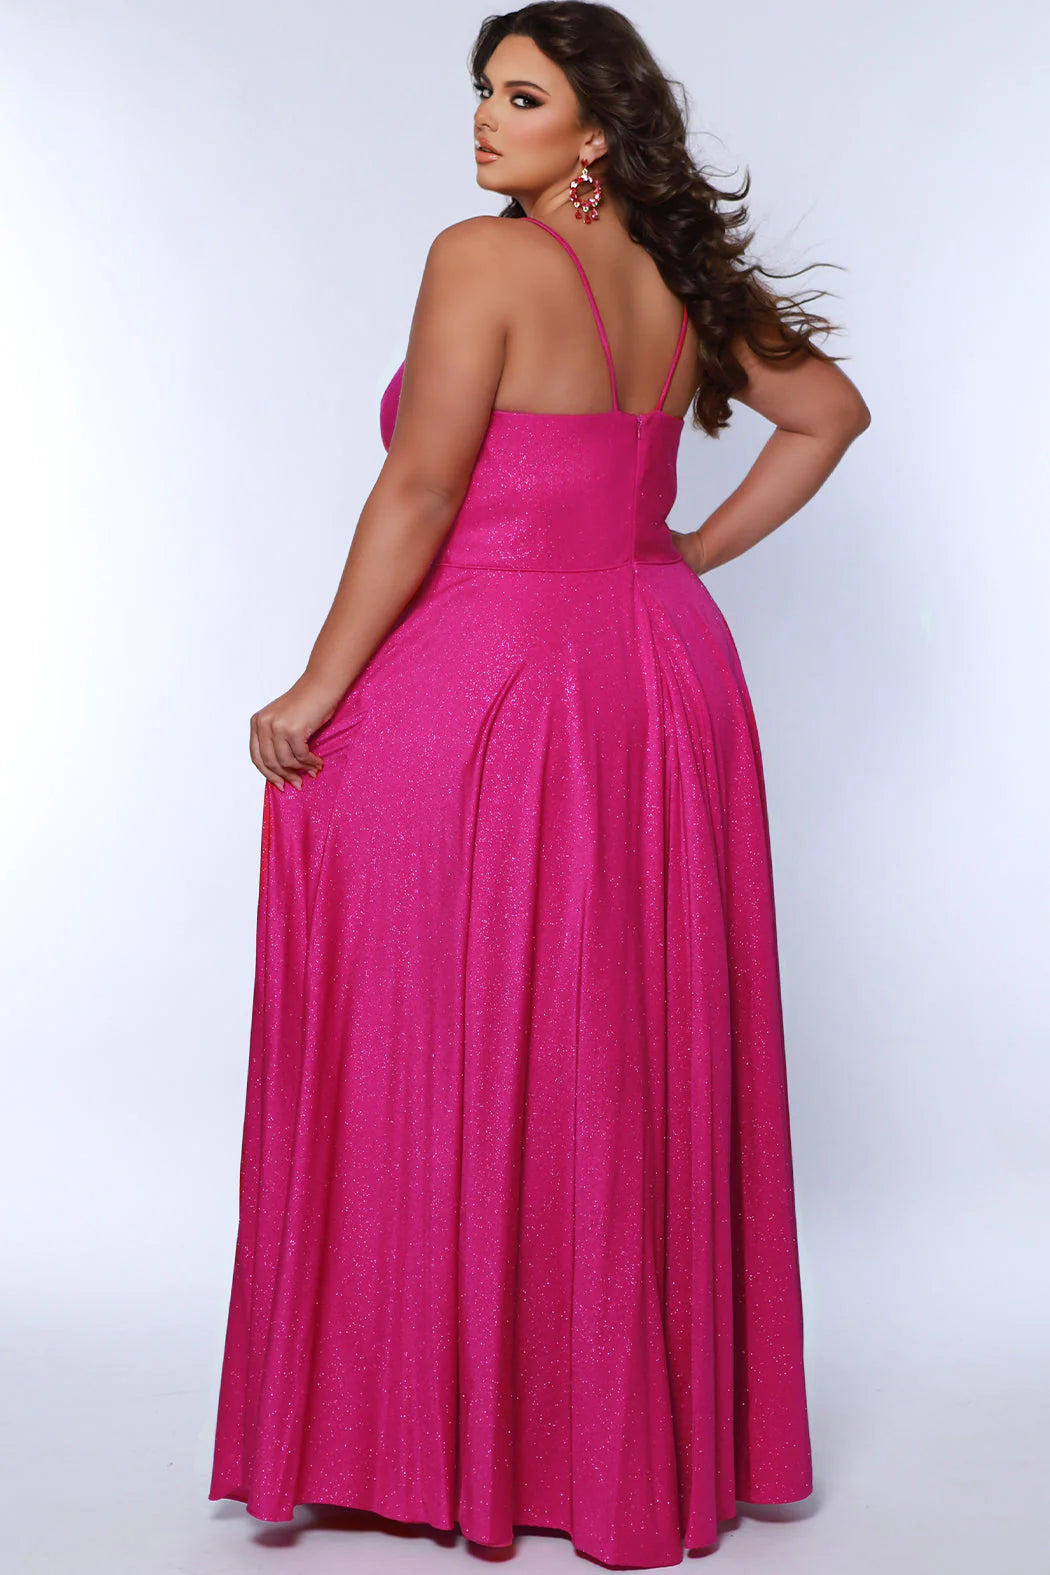 Look your best in our Sydney's Closet SC7375 Long Prom Dress - a beautiful A-line plus-size with a shimmering look an alluring maxi slit, and a formal gown silhouette that is perfect for any special event. The dress offers a flattering fit for all body types. All eyes are on you when you sparkle in this fabulous formal gown designed for women with real curves.